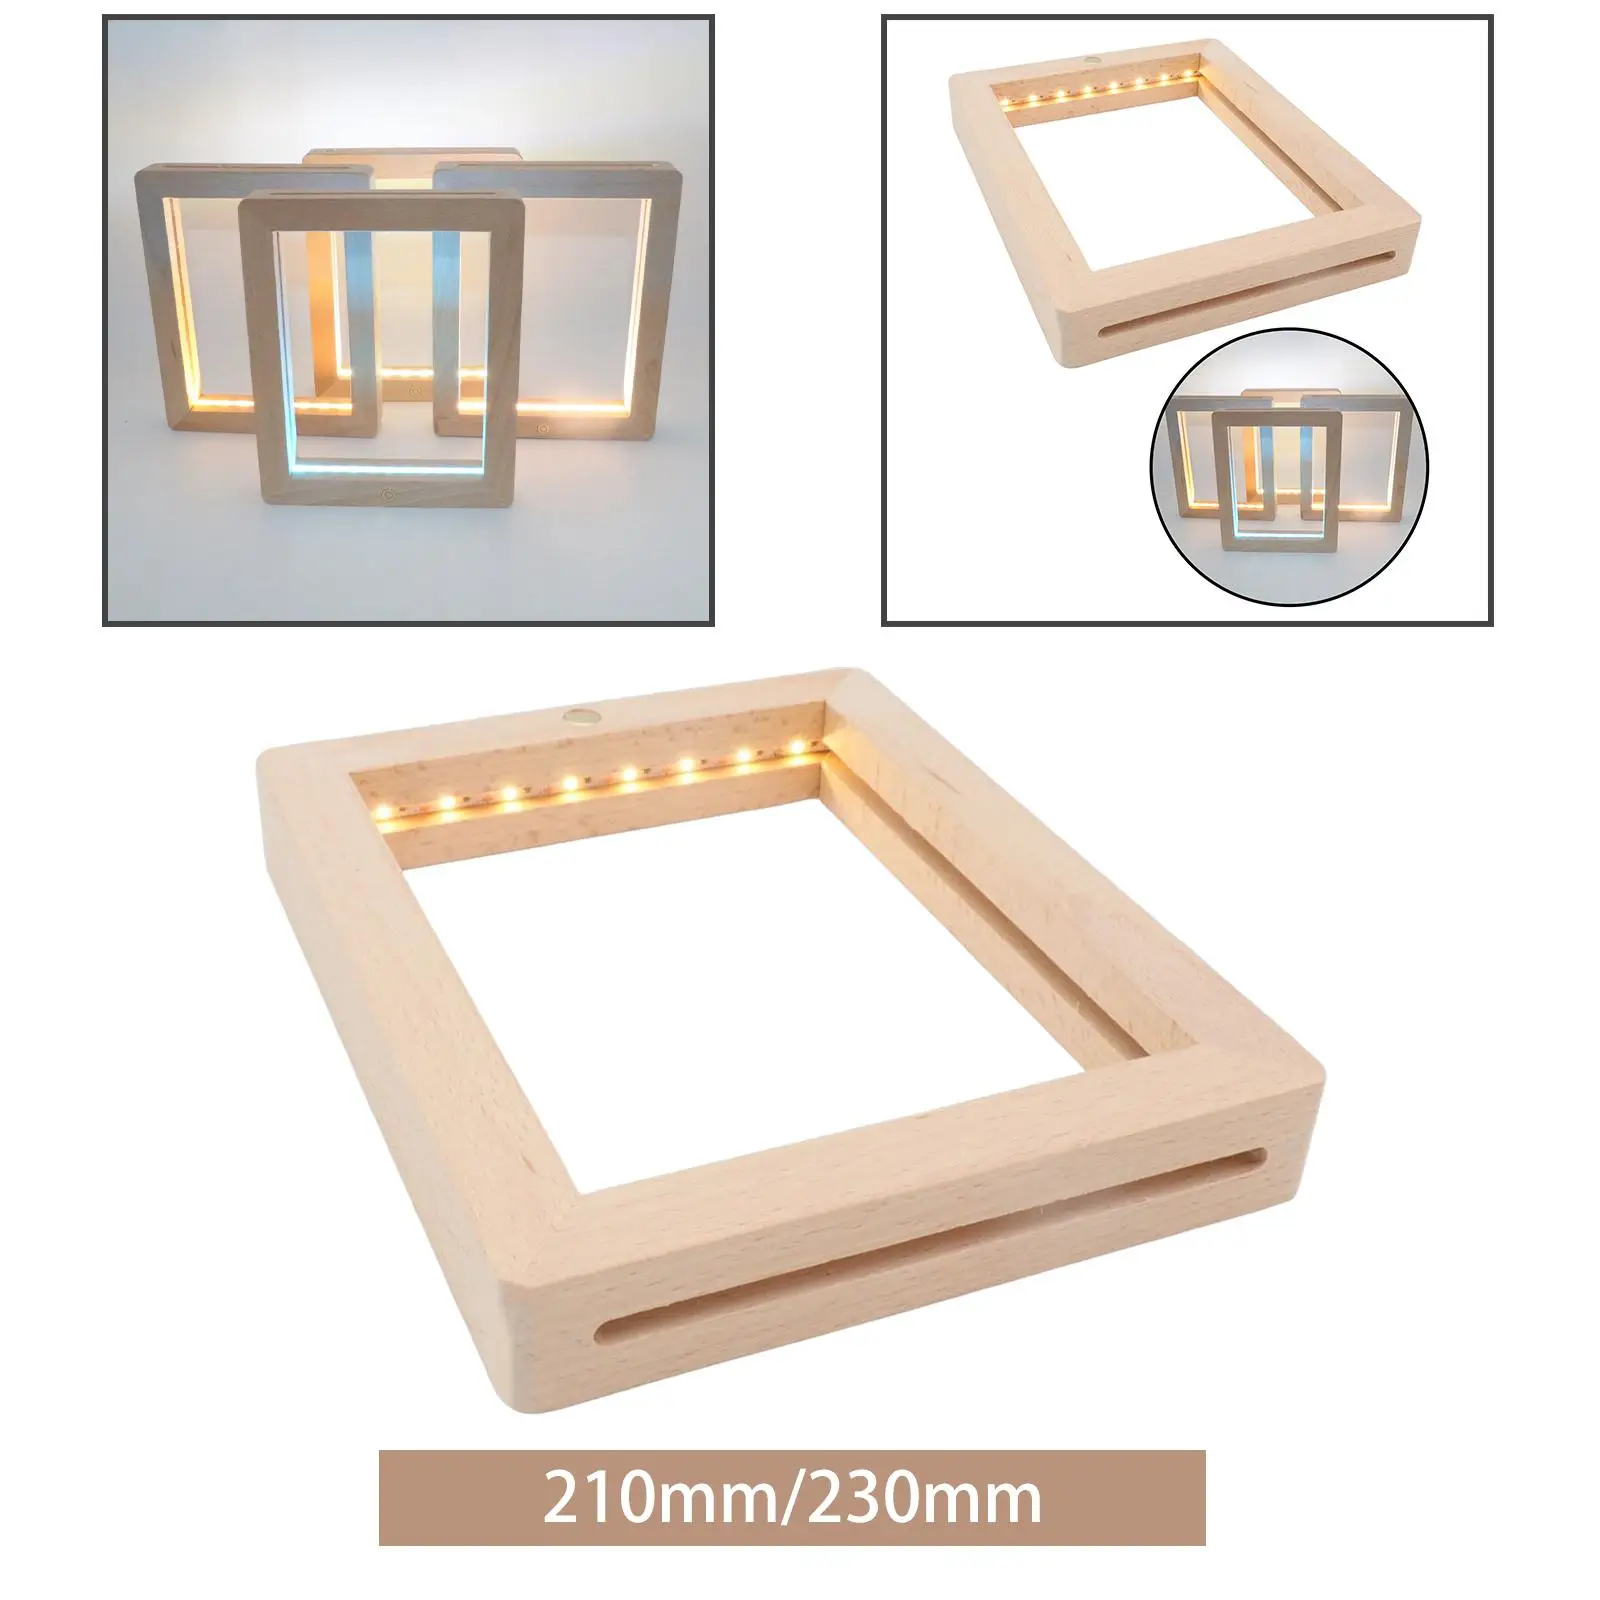 Wood Picture Frame Creative Portable Adjustable Brightness Lamp decors touch Photograph Birthday Gifts Luminous Men Lover Couple